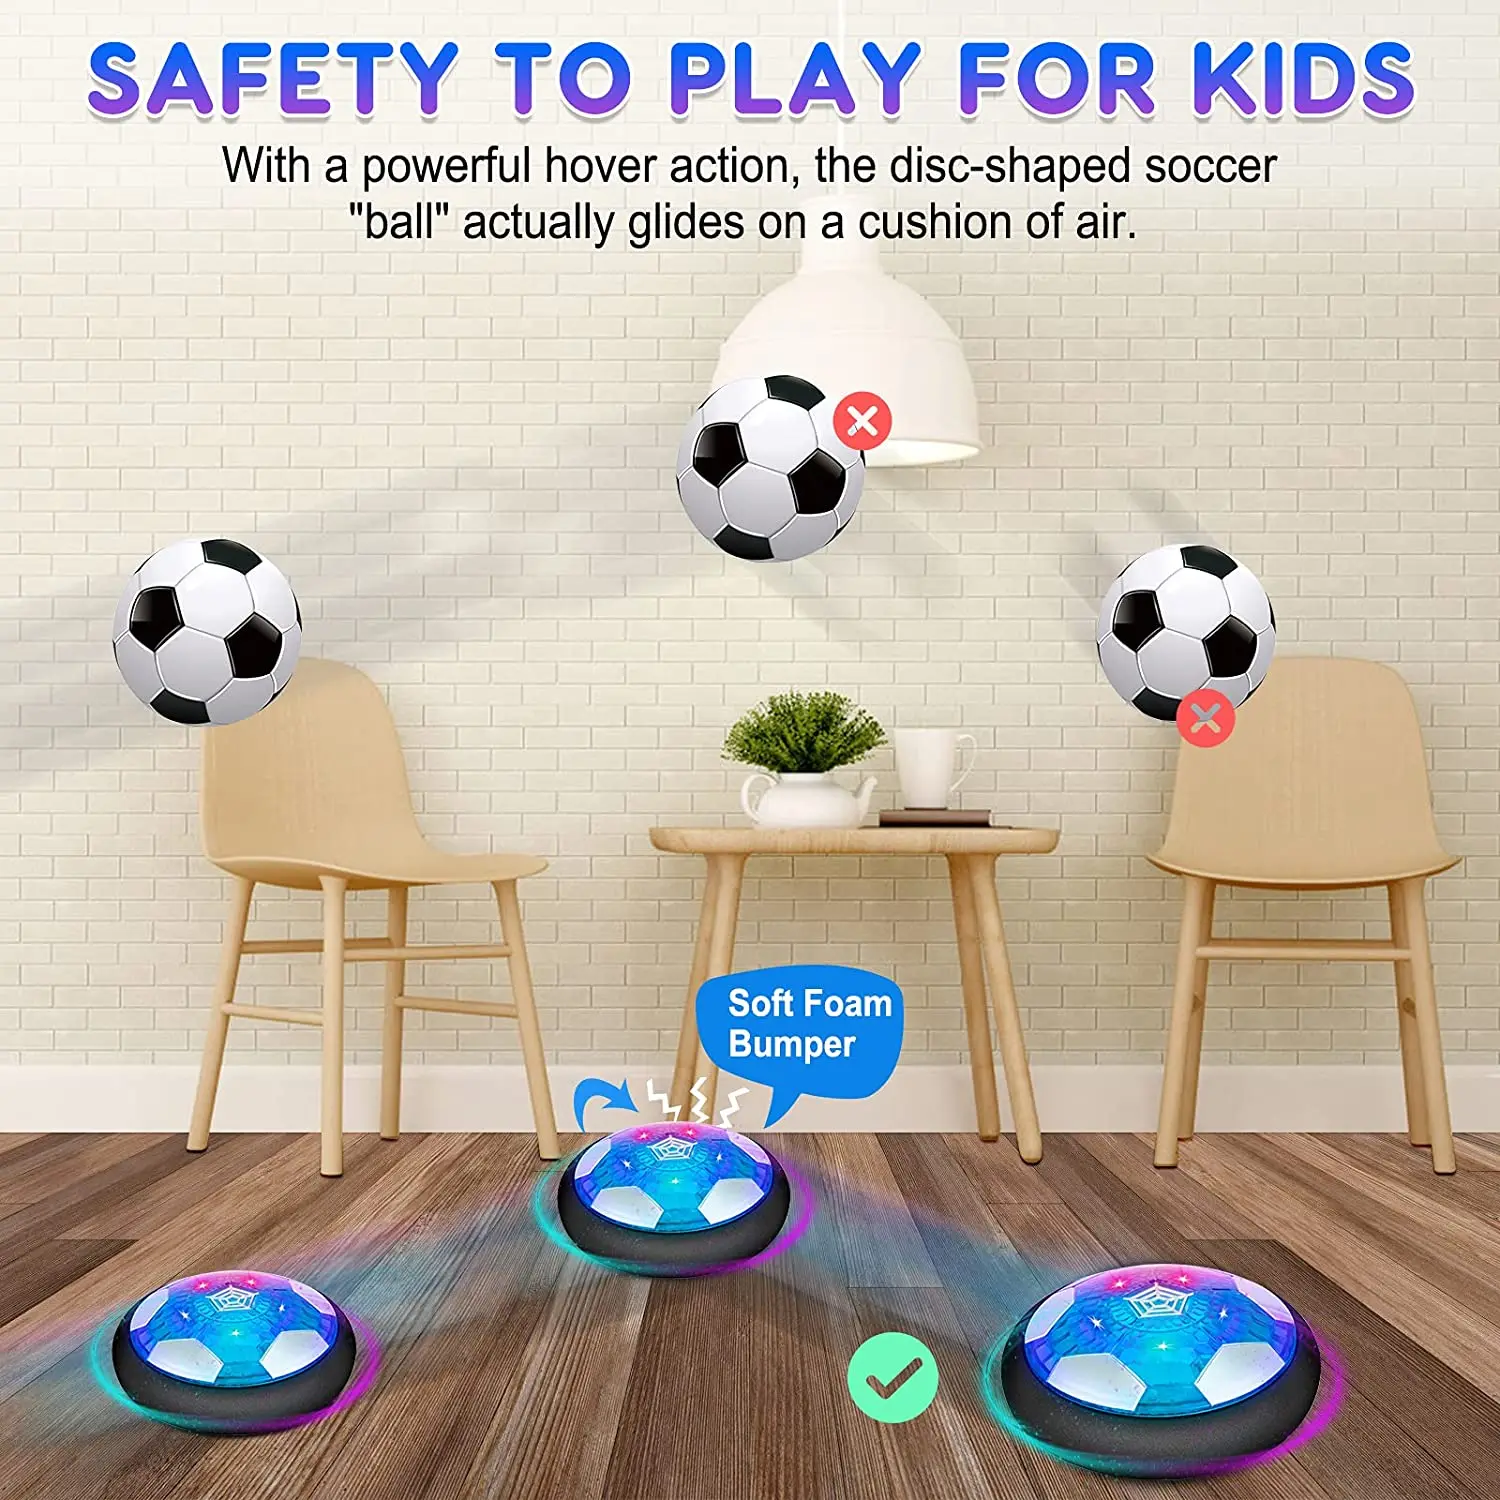 https://ae01.alicdn.com/kf/S5d0222a6b6964a159c6c781ff0e85f55R/Soccer-Kids-Toy-USB-Rechargeable-Hover-Ball-Colored-LED-Lights-for-Kid-Gifts-Gliding-Air-Cushion.jpg